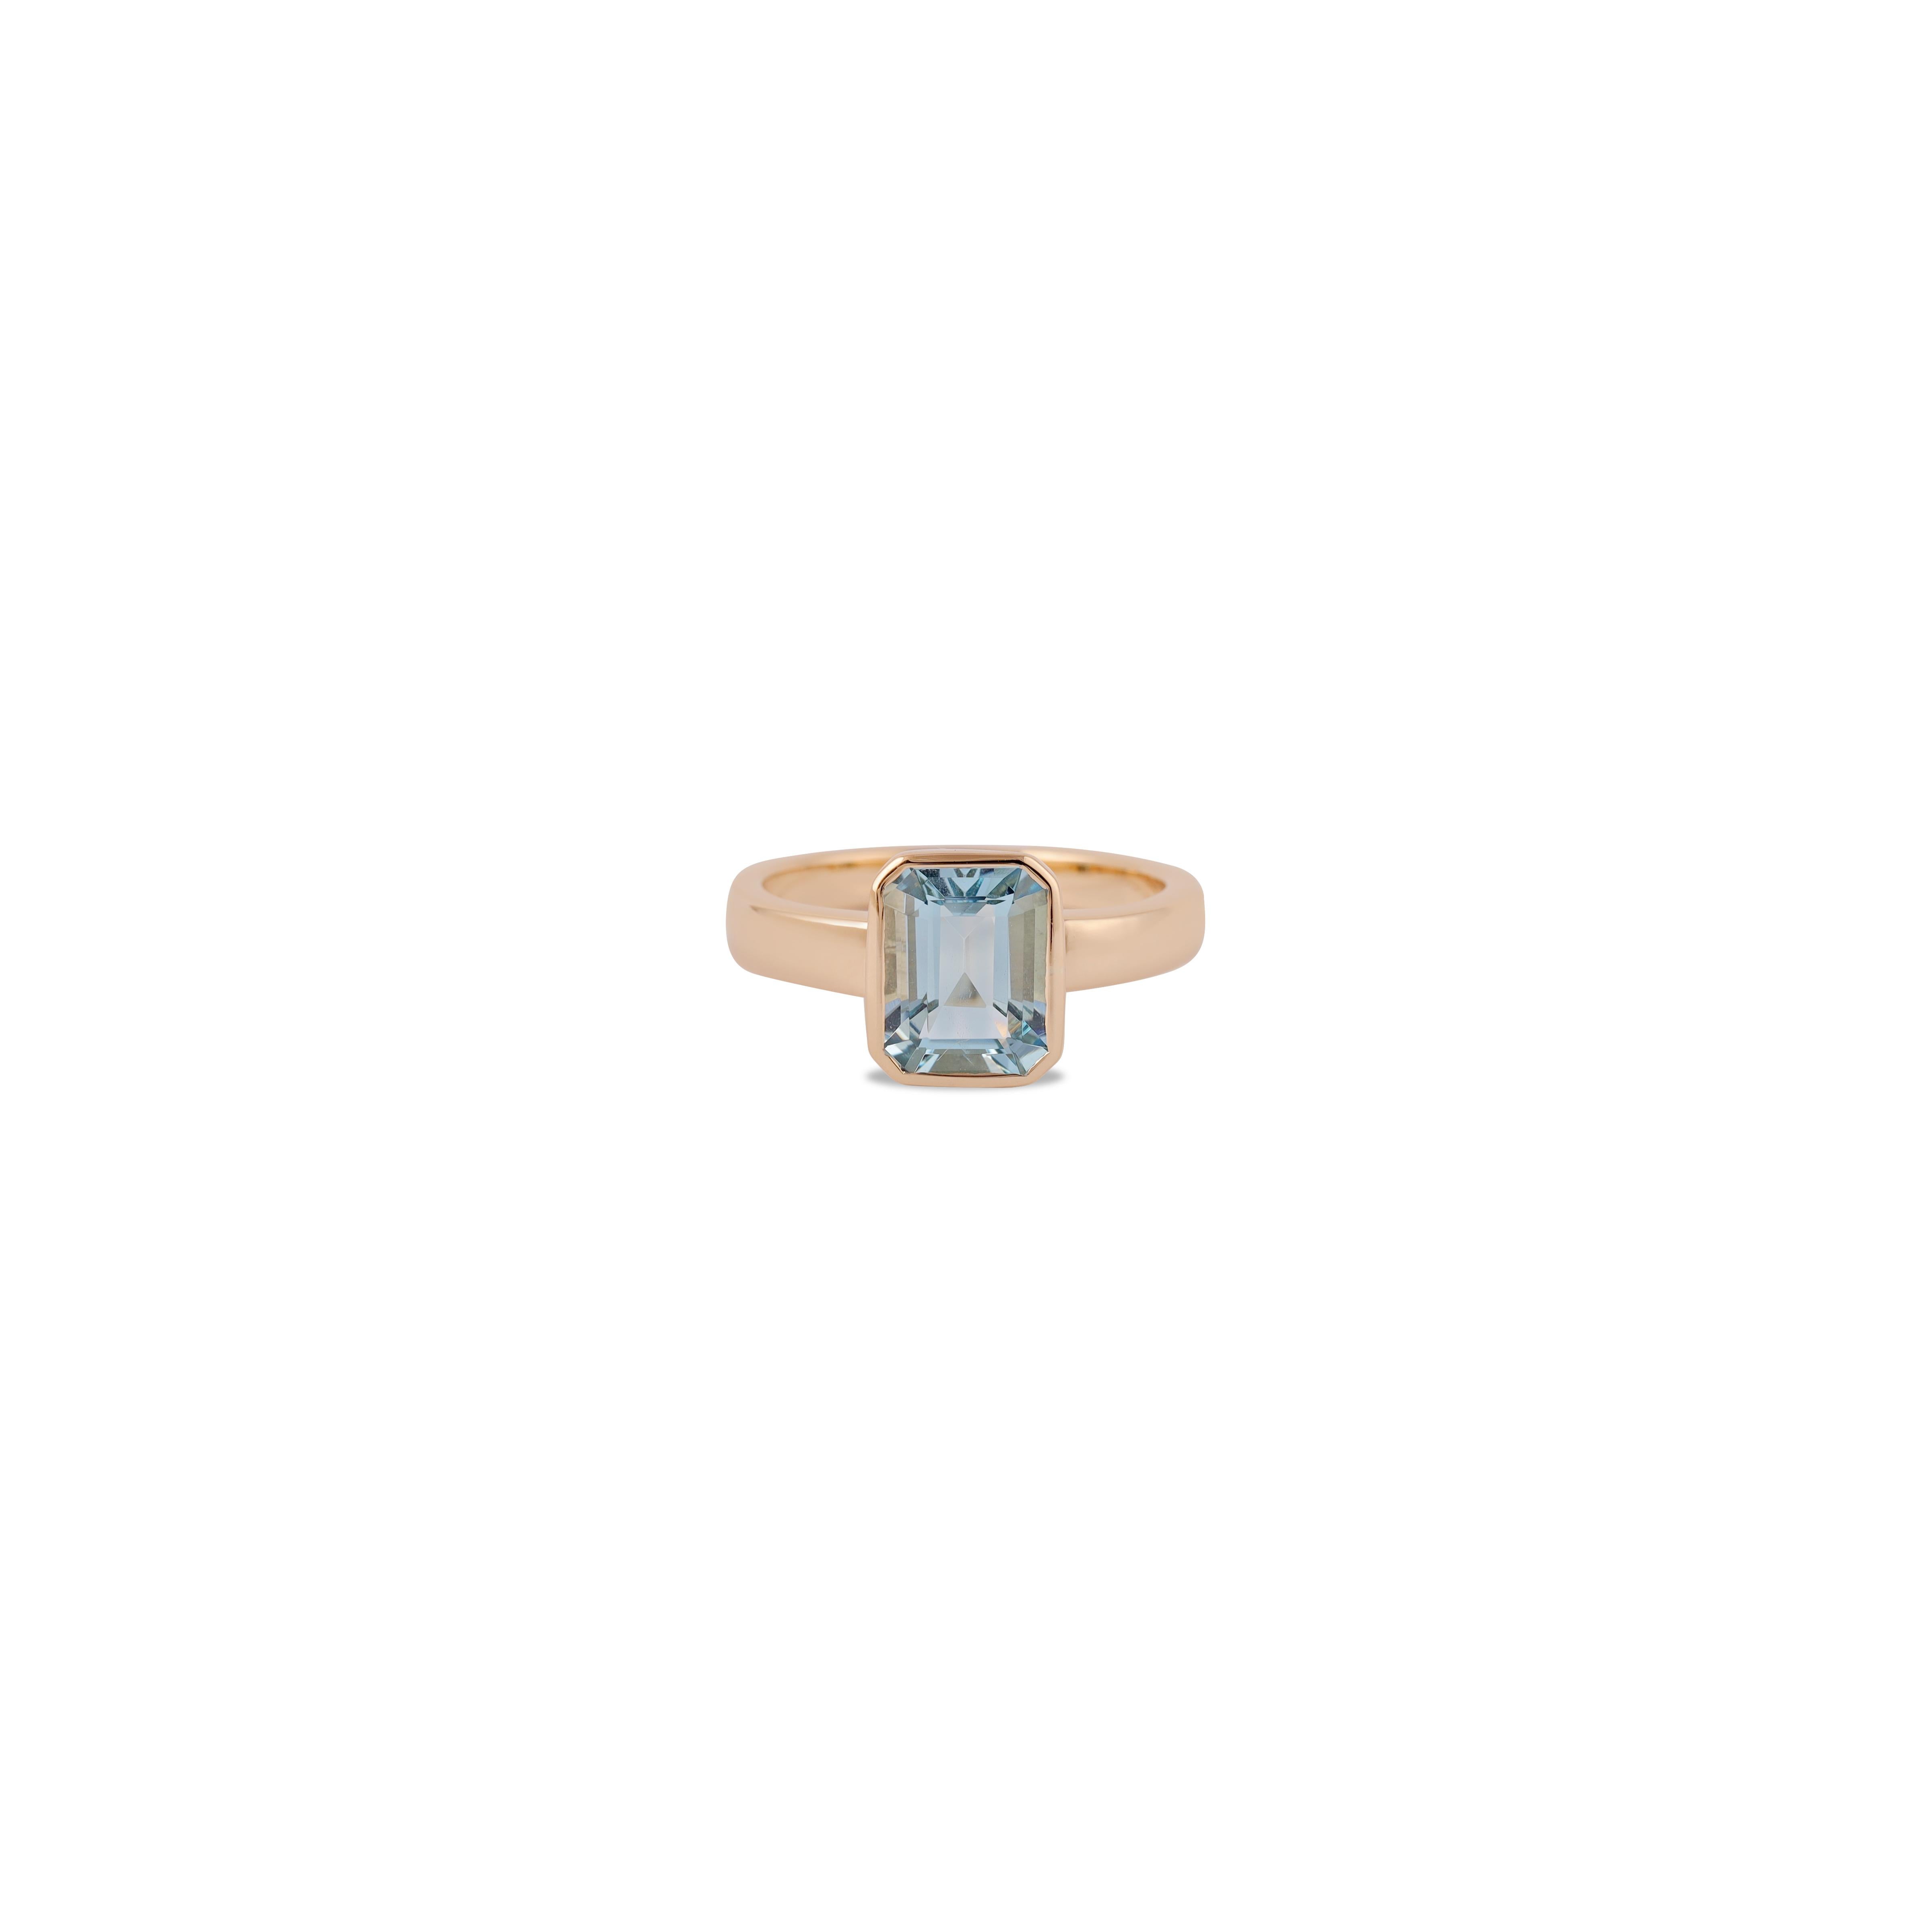 Elegant Aquamarine Close Setting Ring are fun to wear. A classic Single Stone  of Ring with a designer touch with its setting in 18K Yellow gold, giving it a true Fun look.

2.26 Carat Aquamarine Close Setting  Ring  in 18 Karat Rose